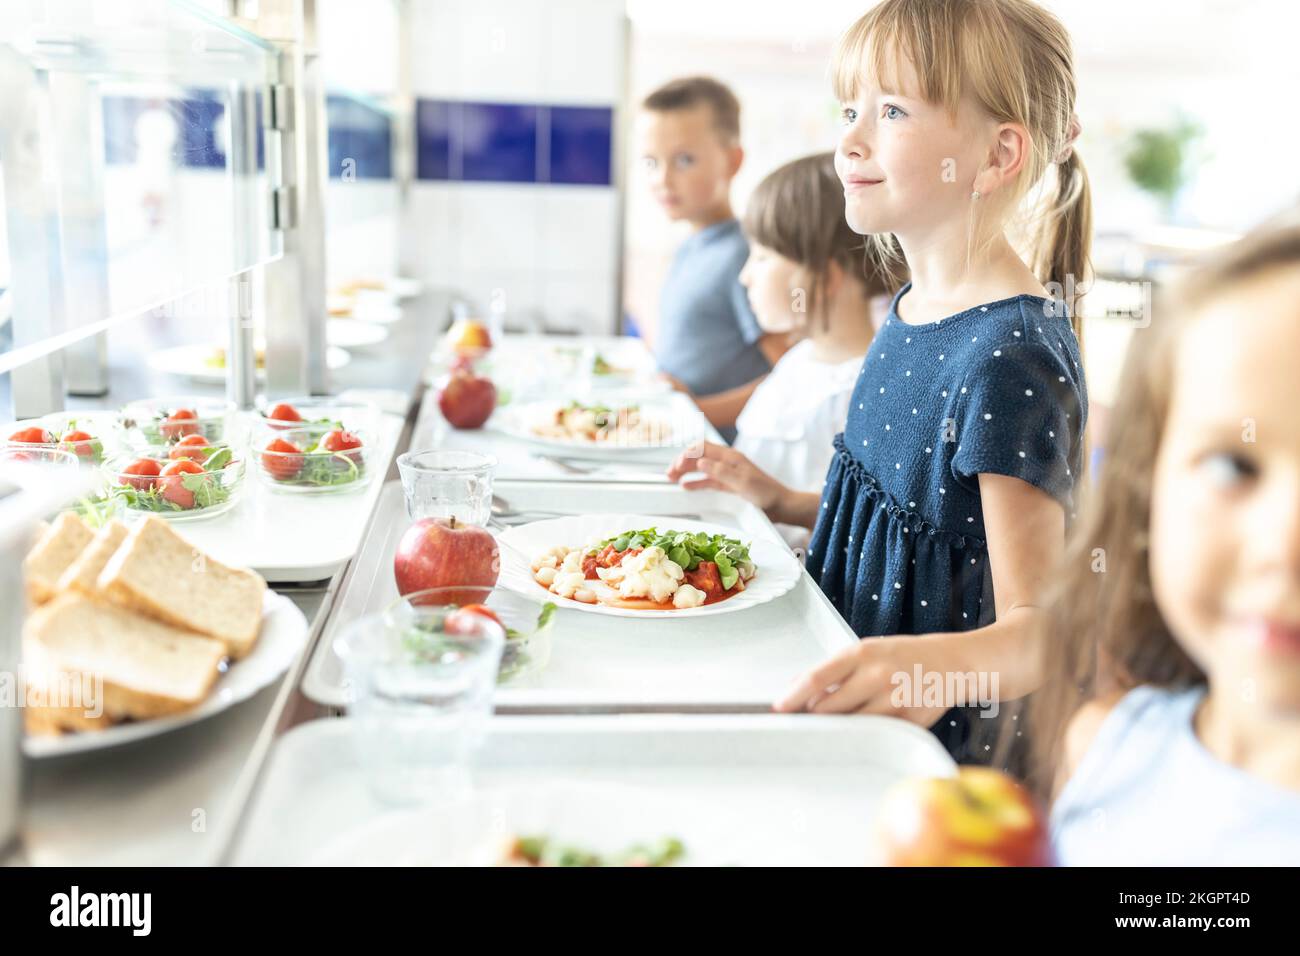 Girl with blond hair holding lunch tray at school cafeteria Stock Photo